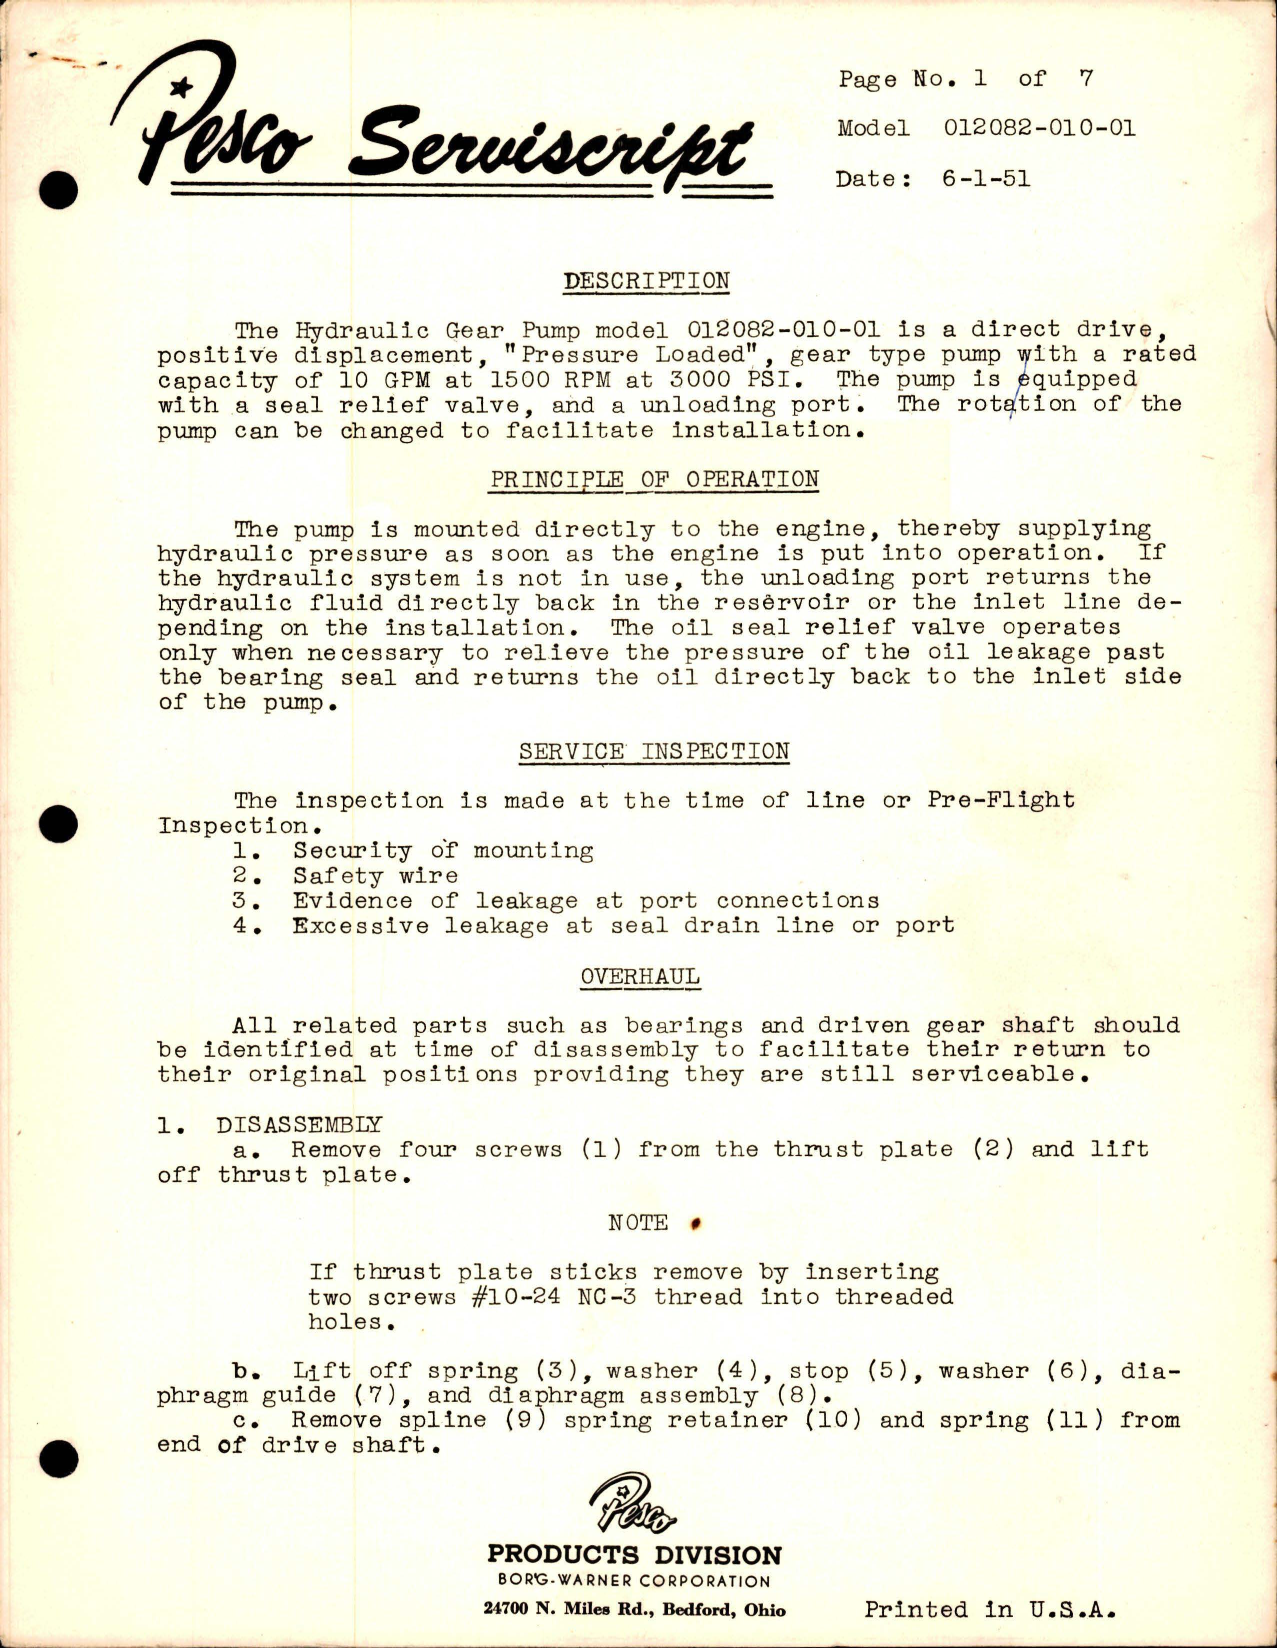 Sample page 1 from AirCorps Library document: Overhaul and Service Instructions for Hydraulic Gear Pump - Model 012082-010-01 